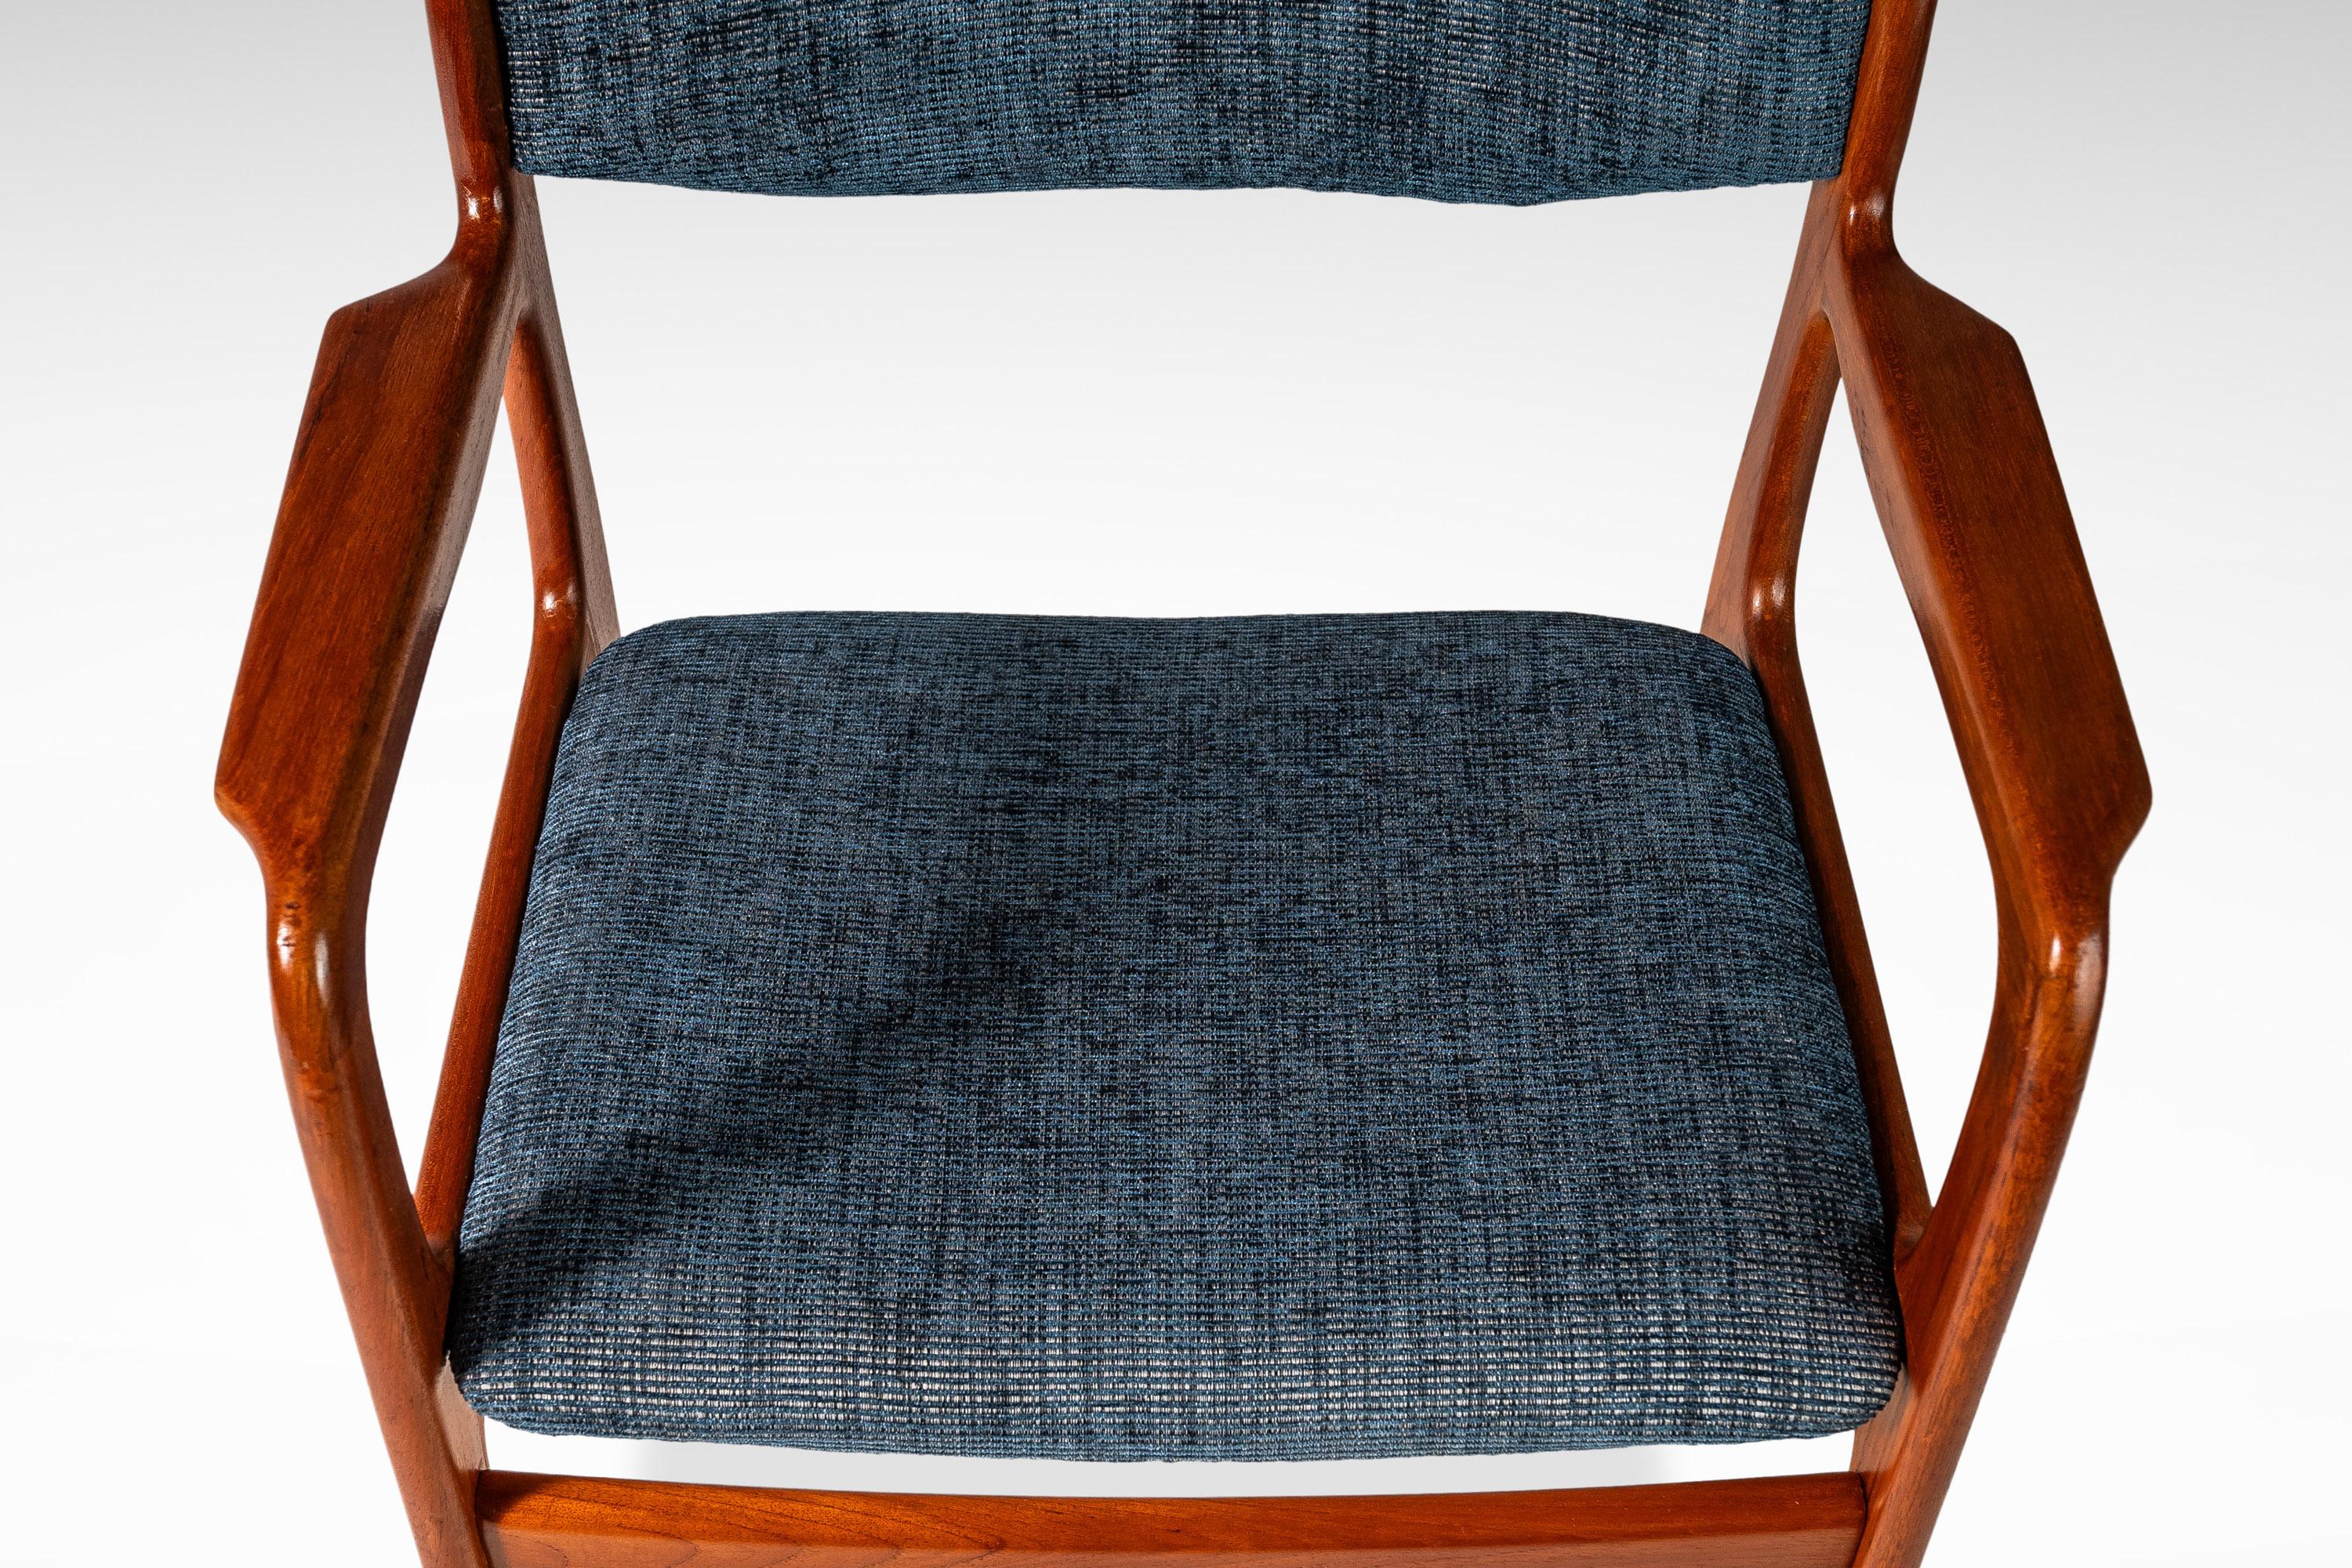 Arm Chair in Solid Teak and New Upholstery by Benny Linden Designs, c. 1970s For Sale 12